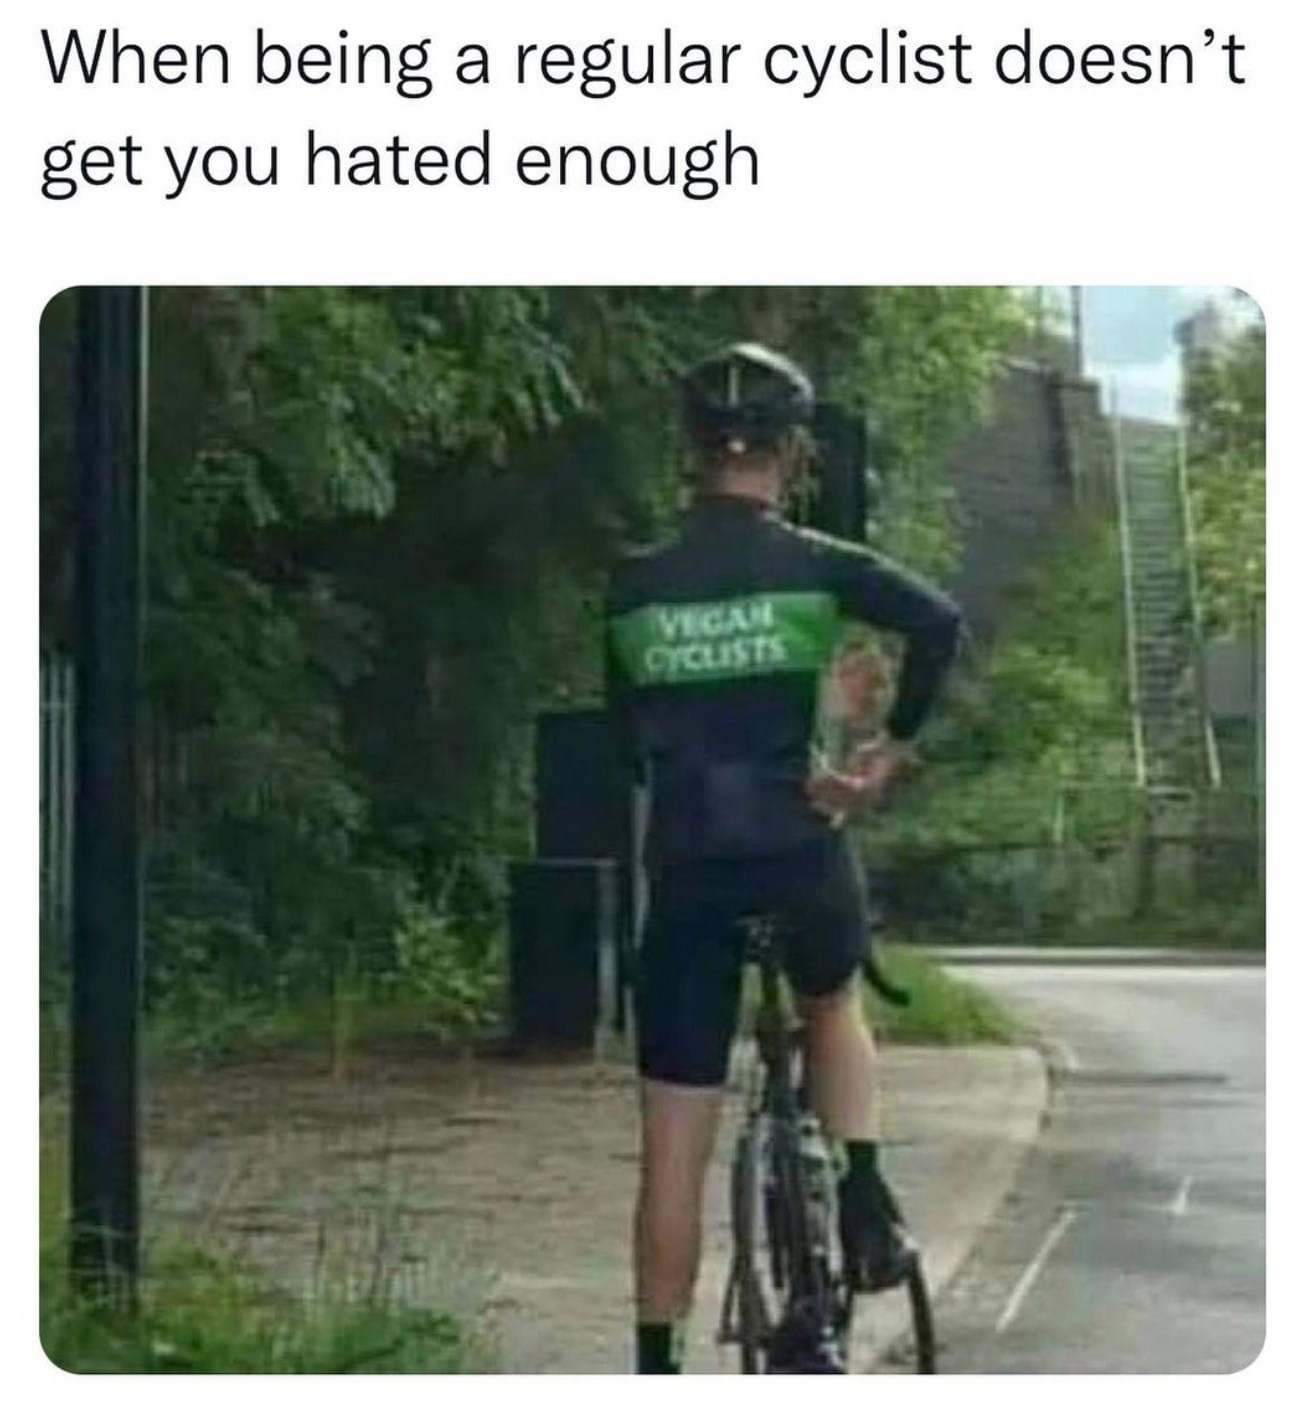 when being a regular cyclist doesn’t get you hated enough, vegan cyclist